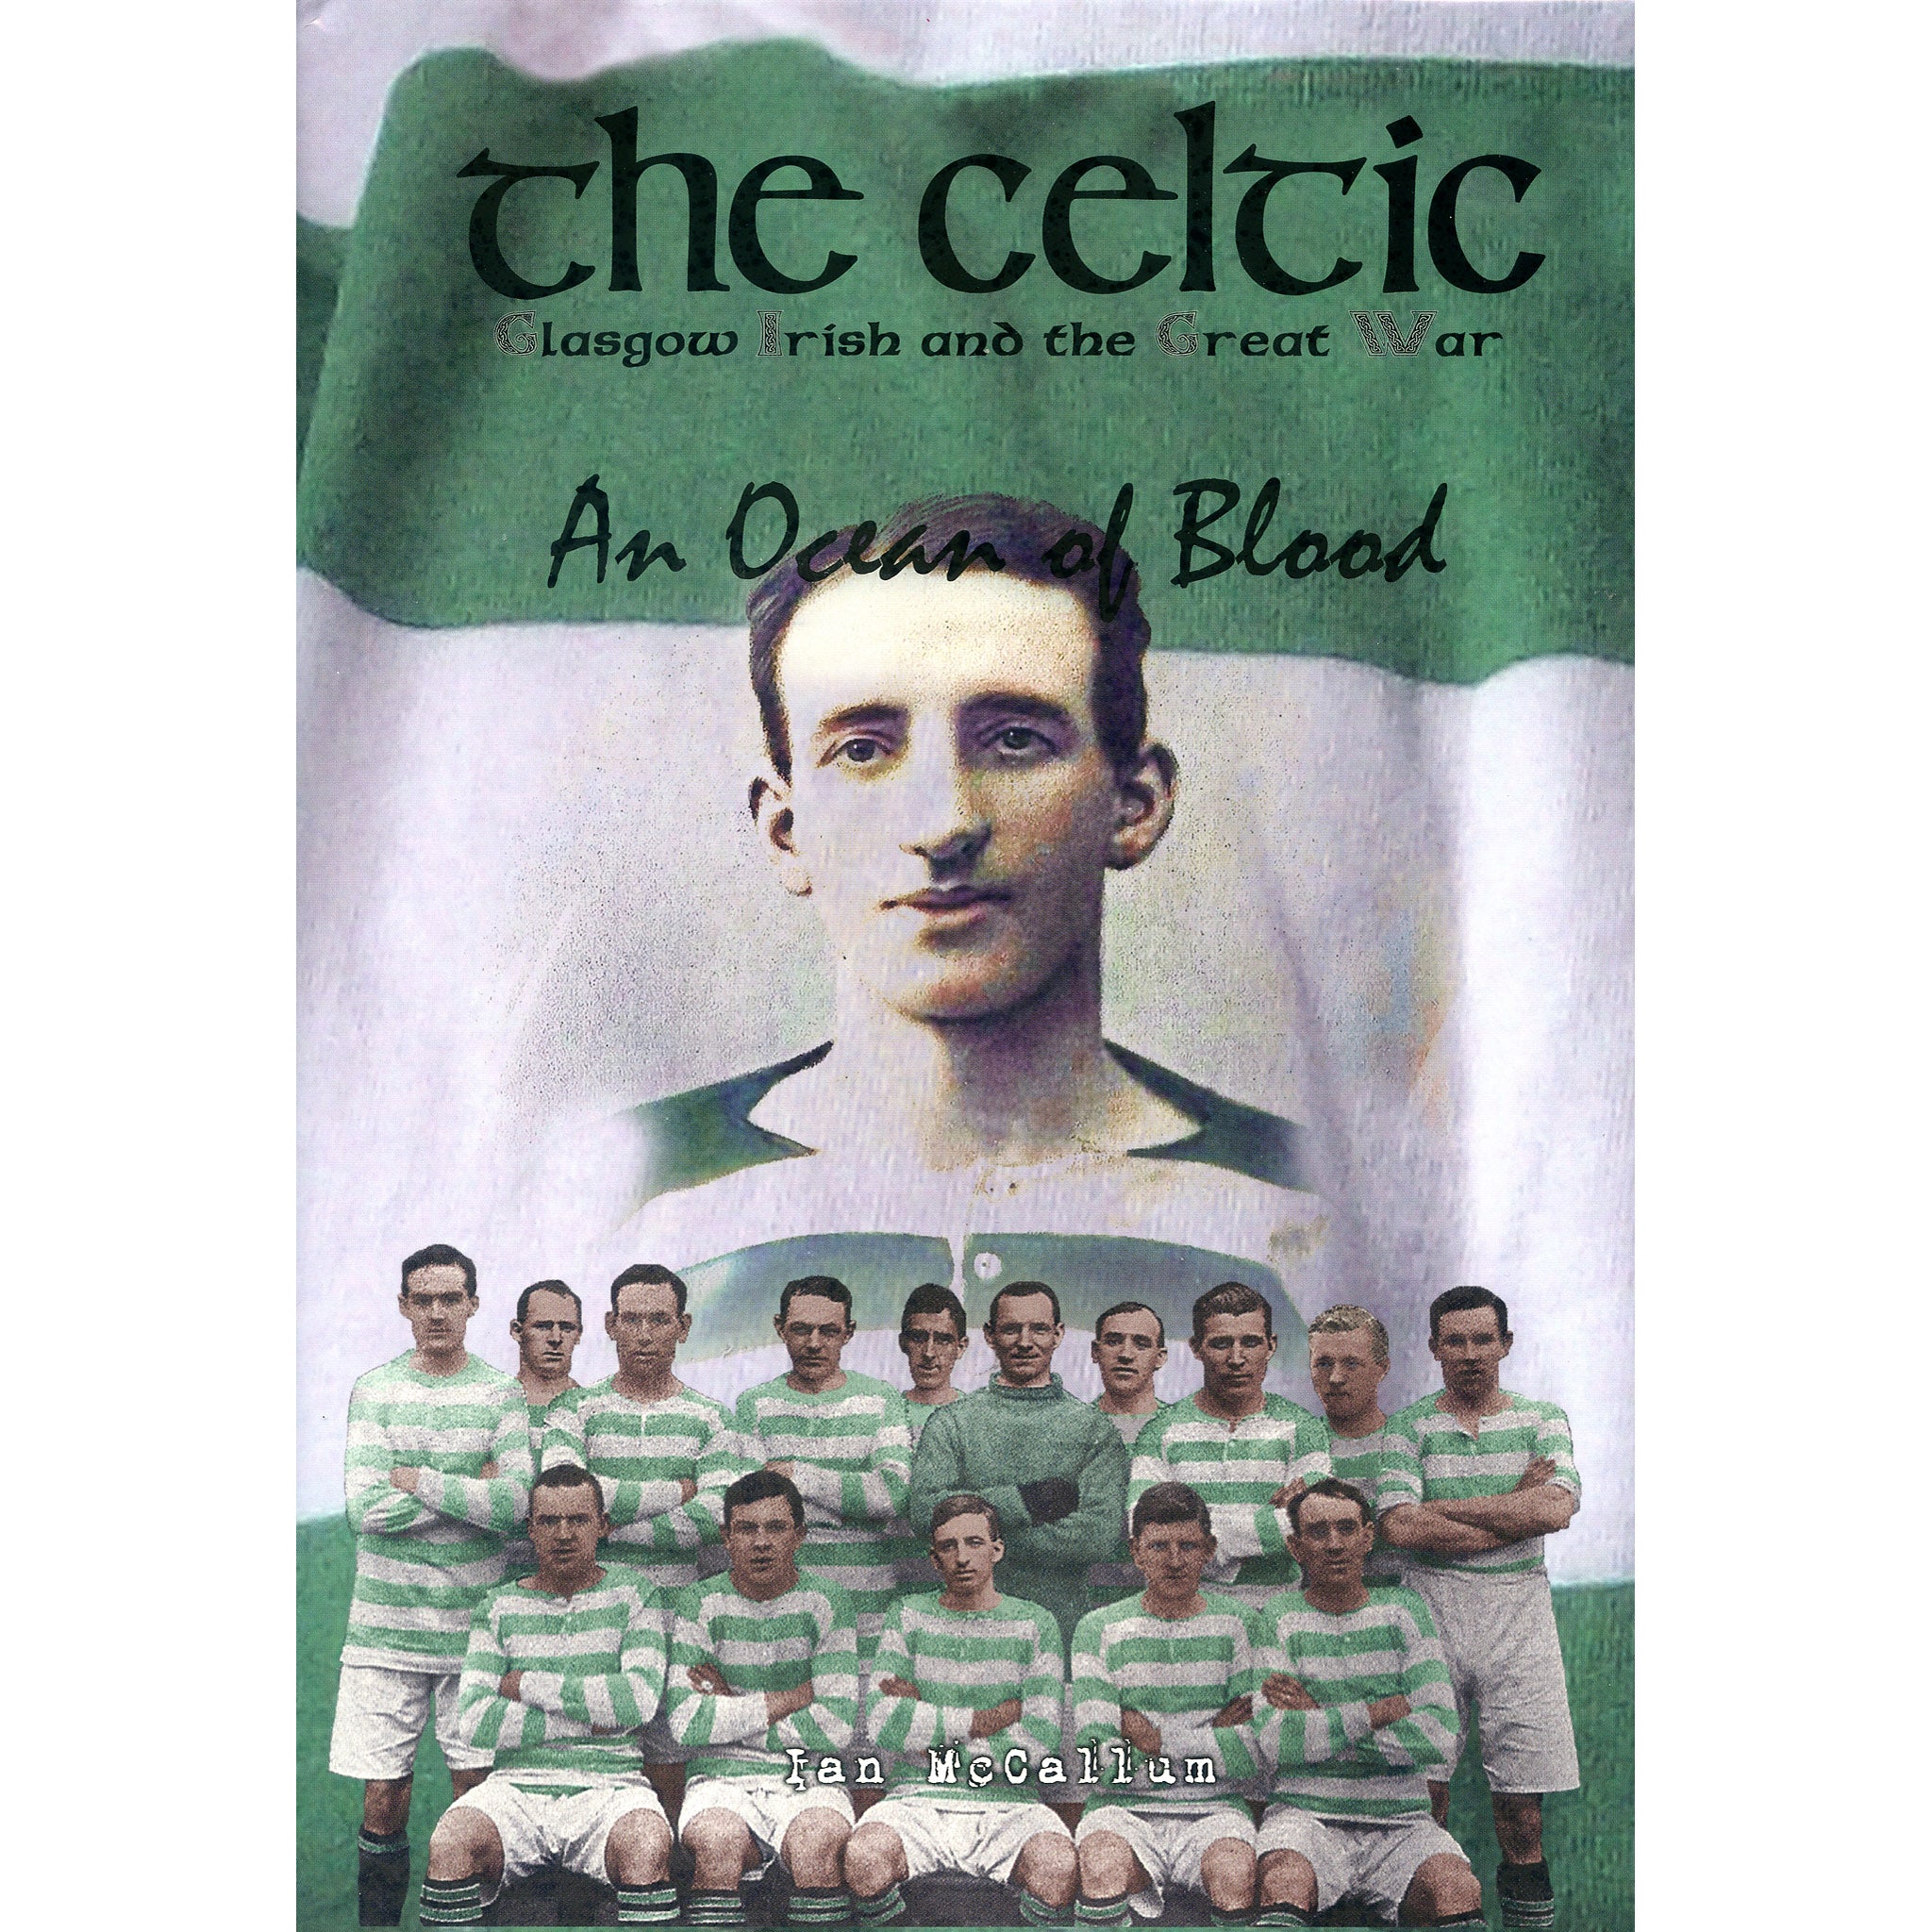 An Ocean of Blood – The Celtic, Glasgow Irish and the Great War